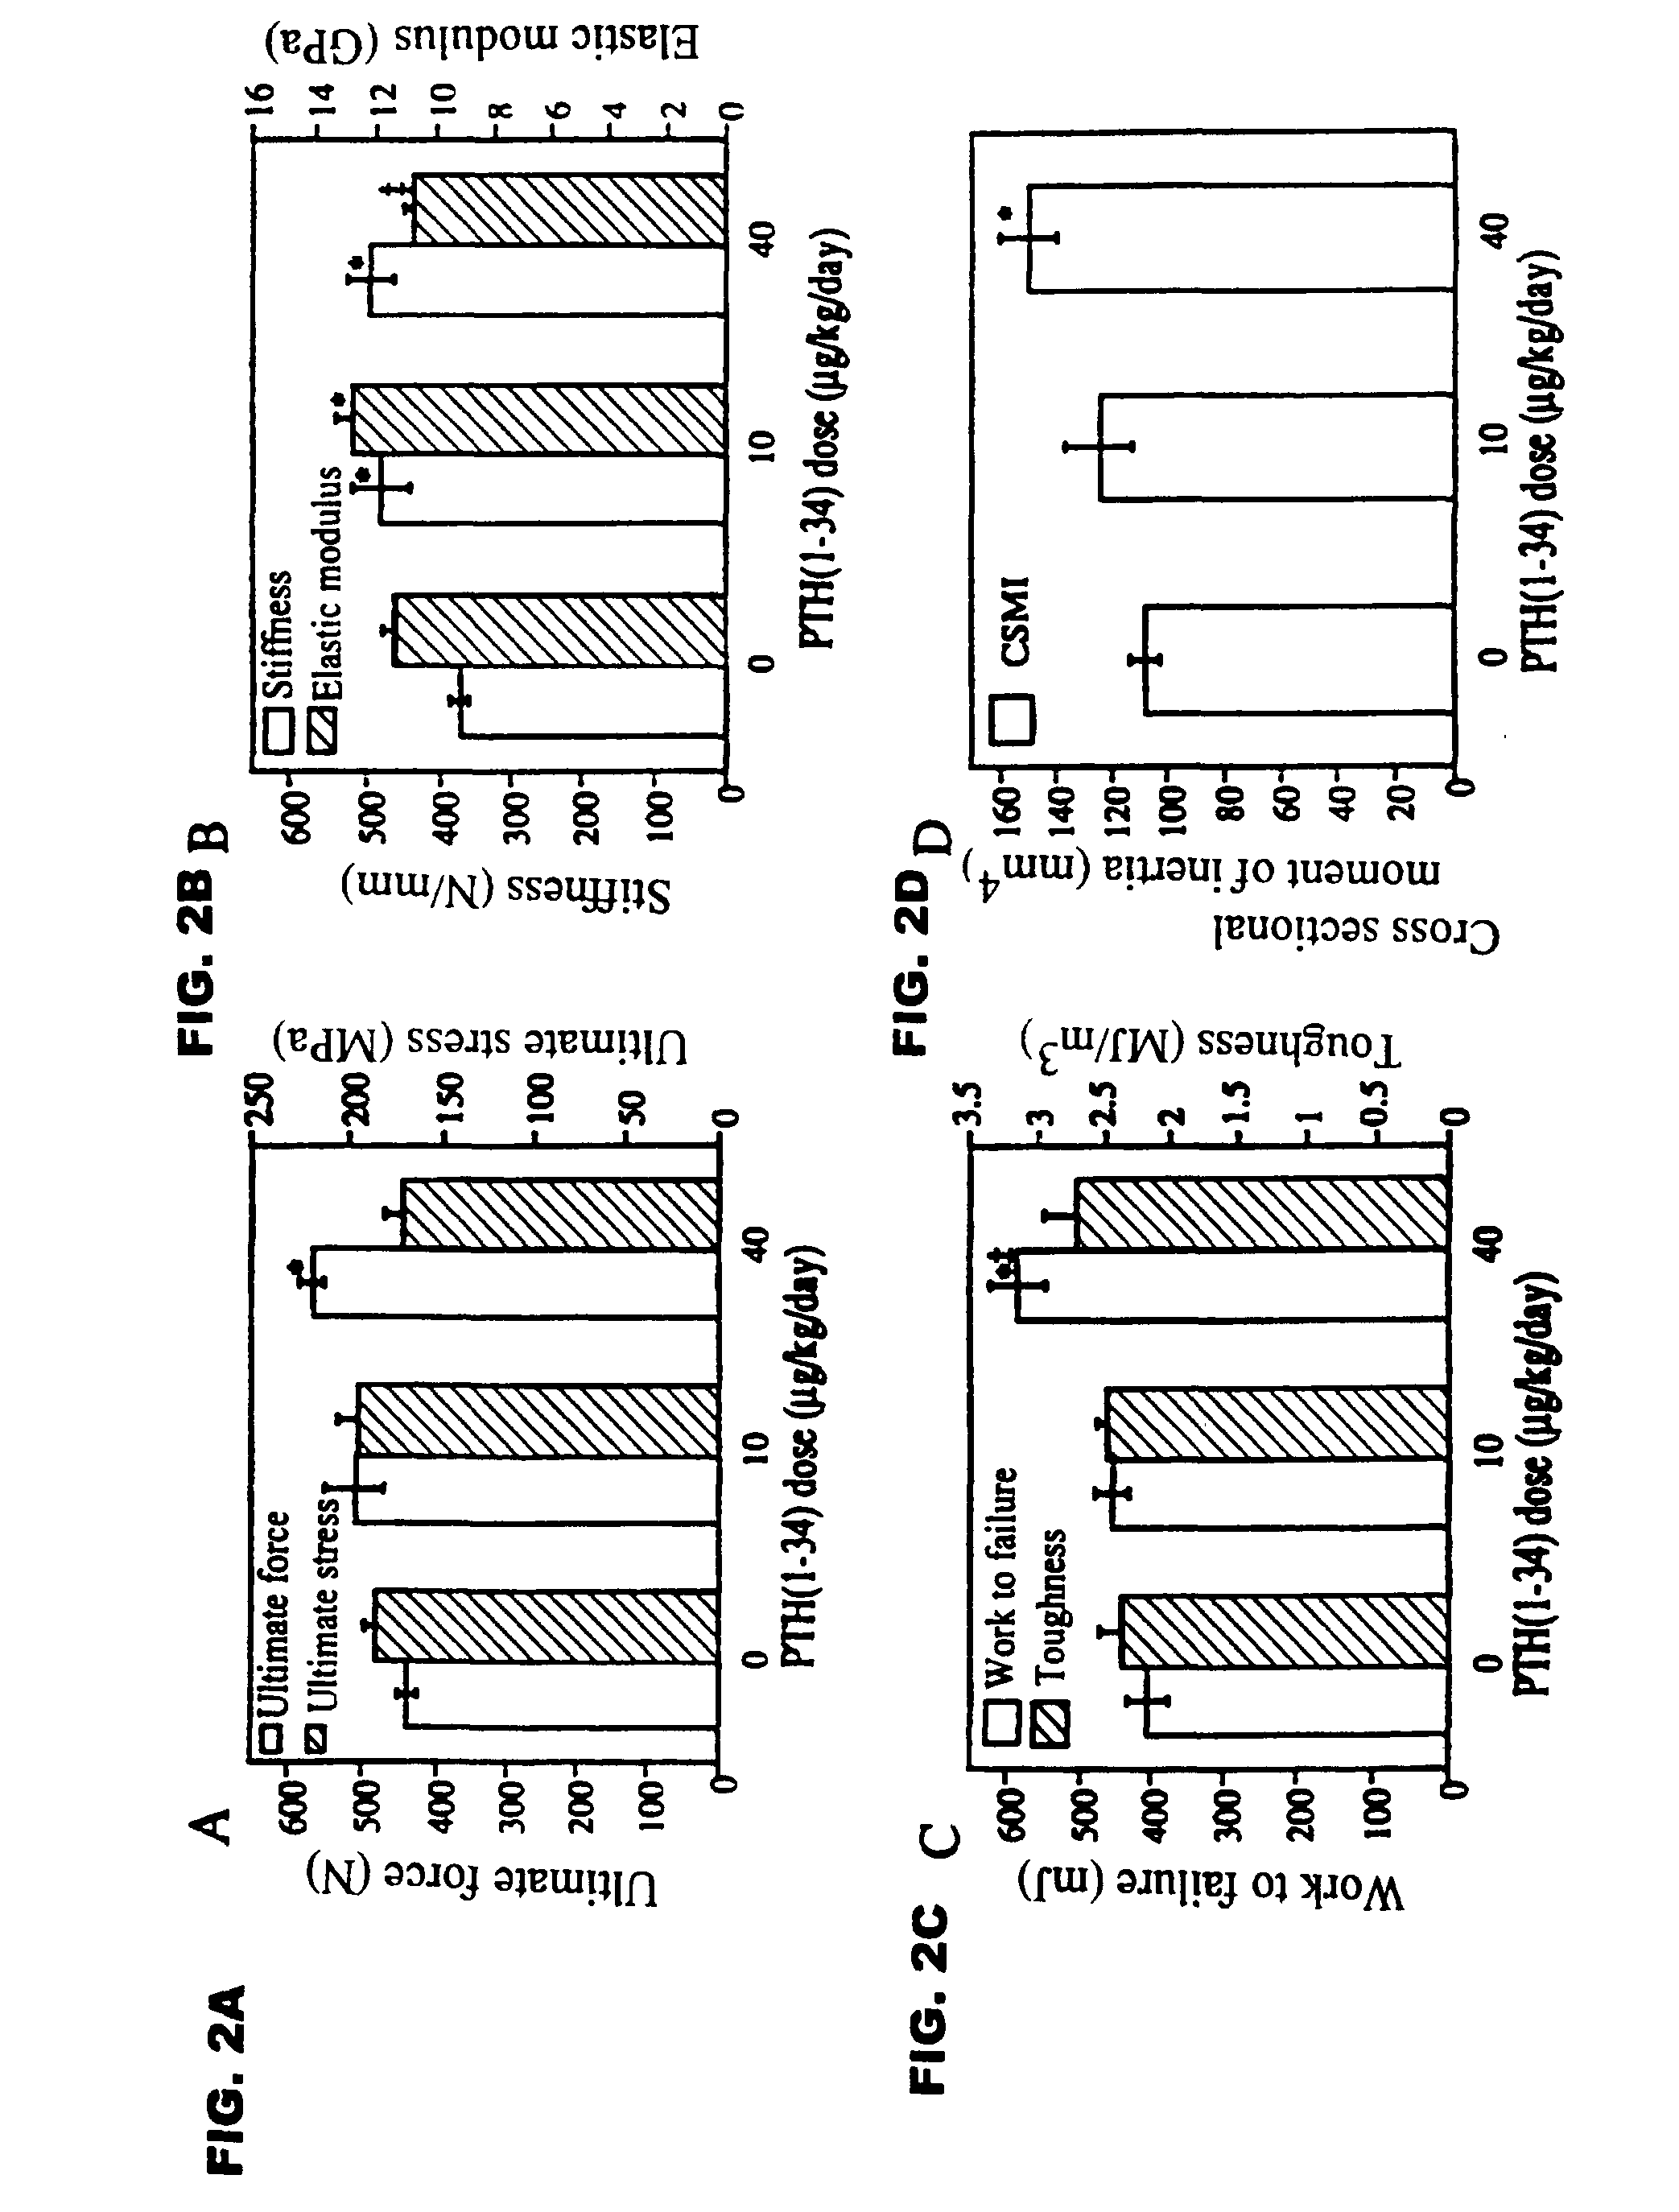 Method of reducing the risk of bone fracture